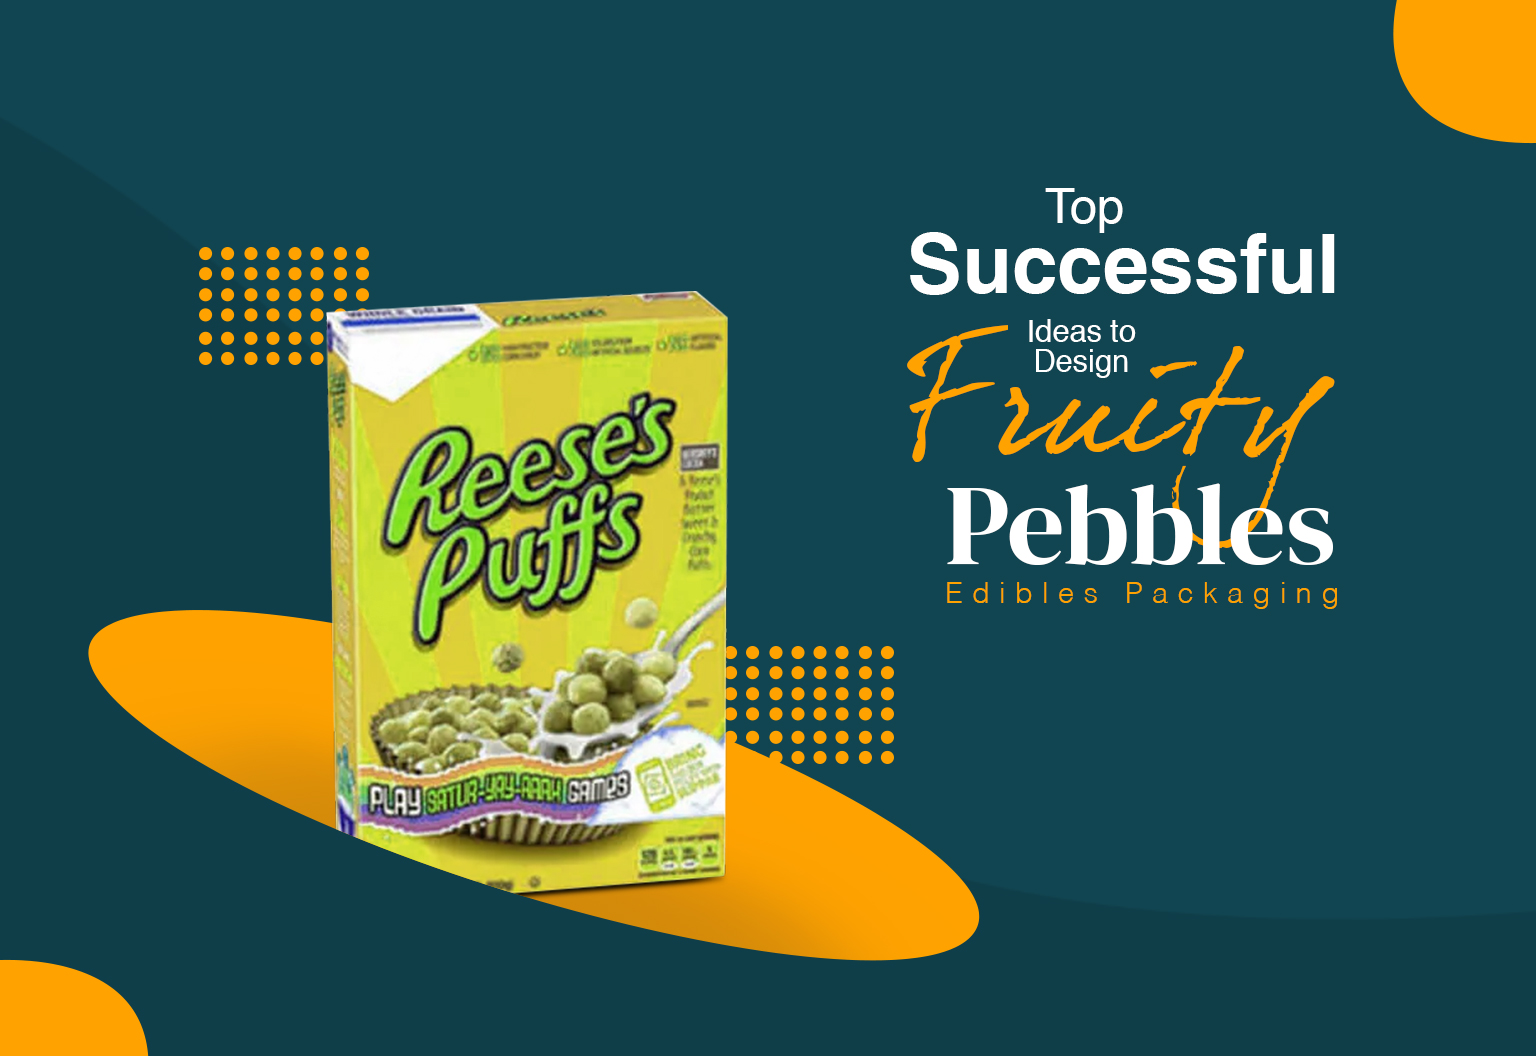 Top-Successful-Ideas-to-Design-Fruity-Pebbles-Edibles-Packaging